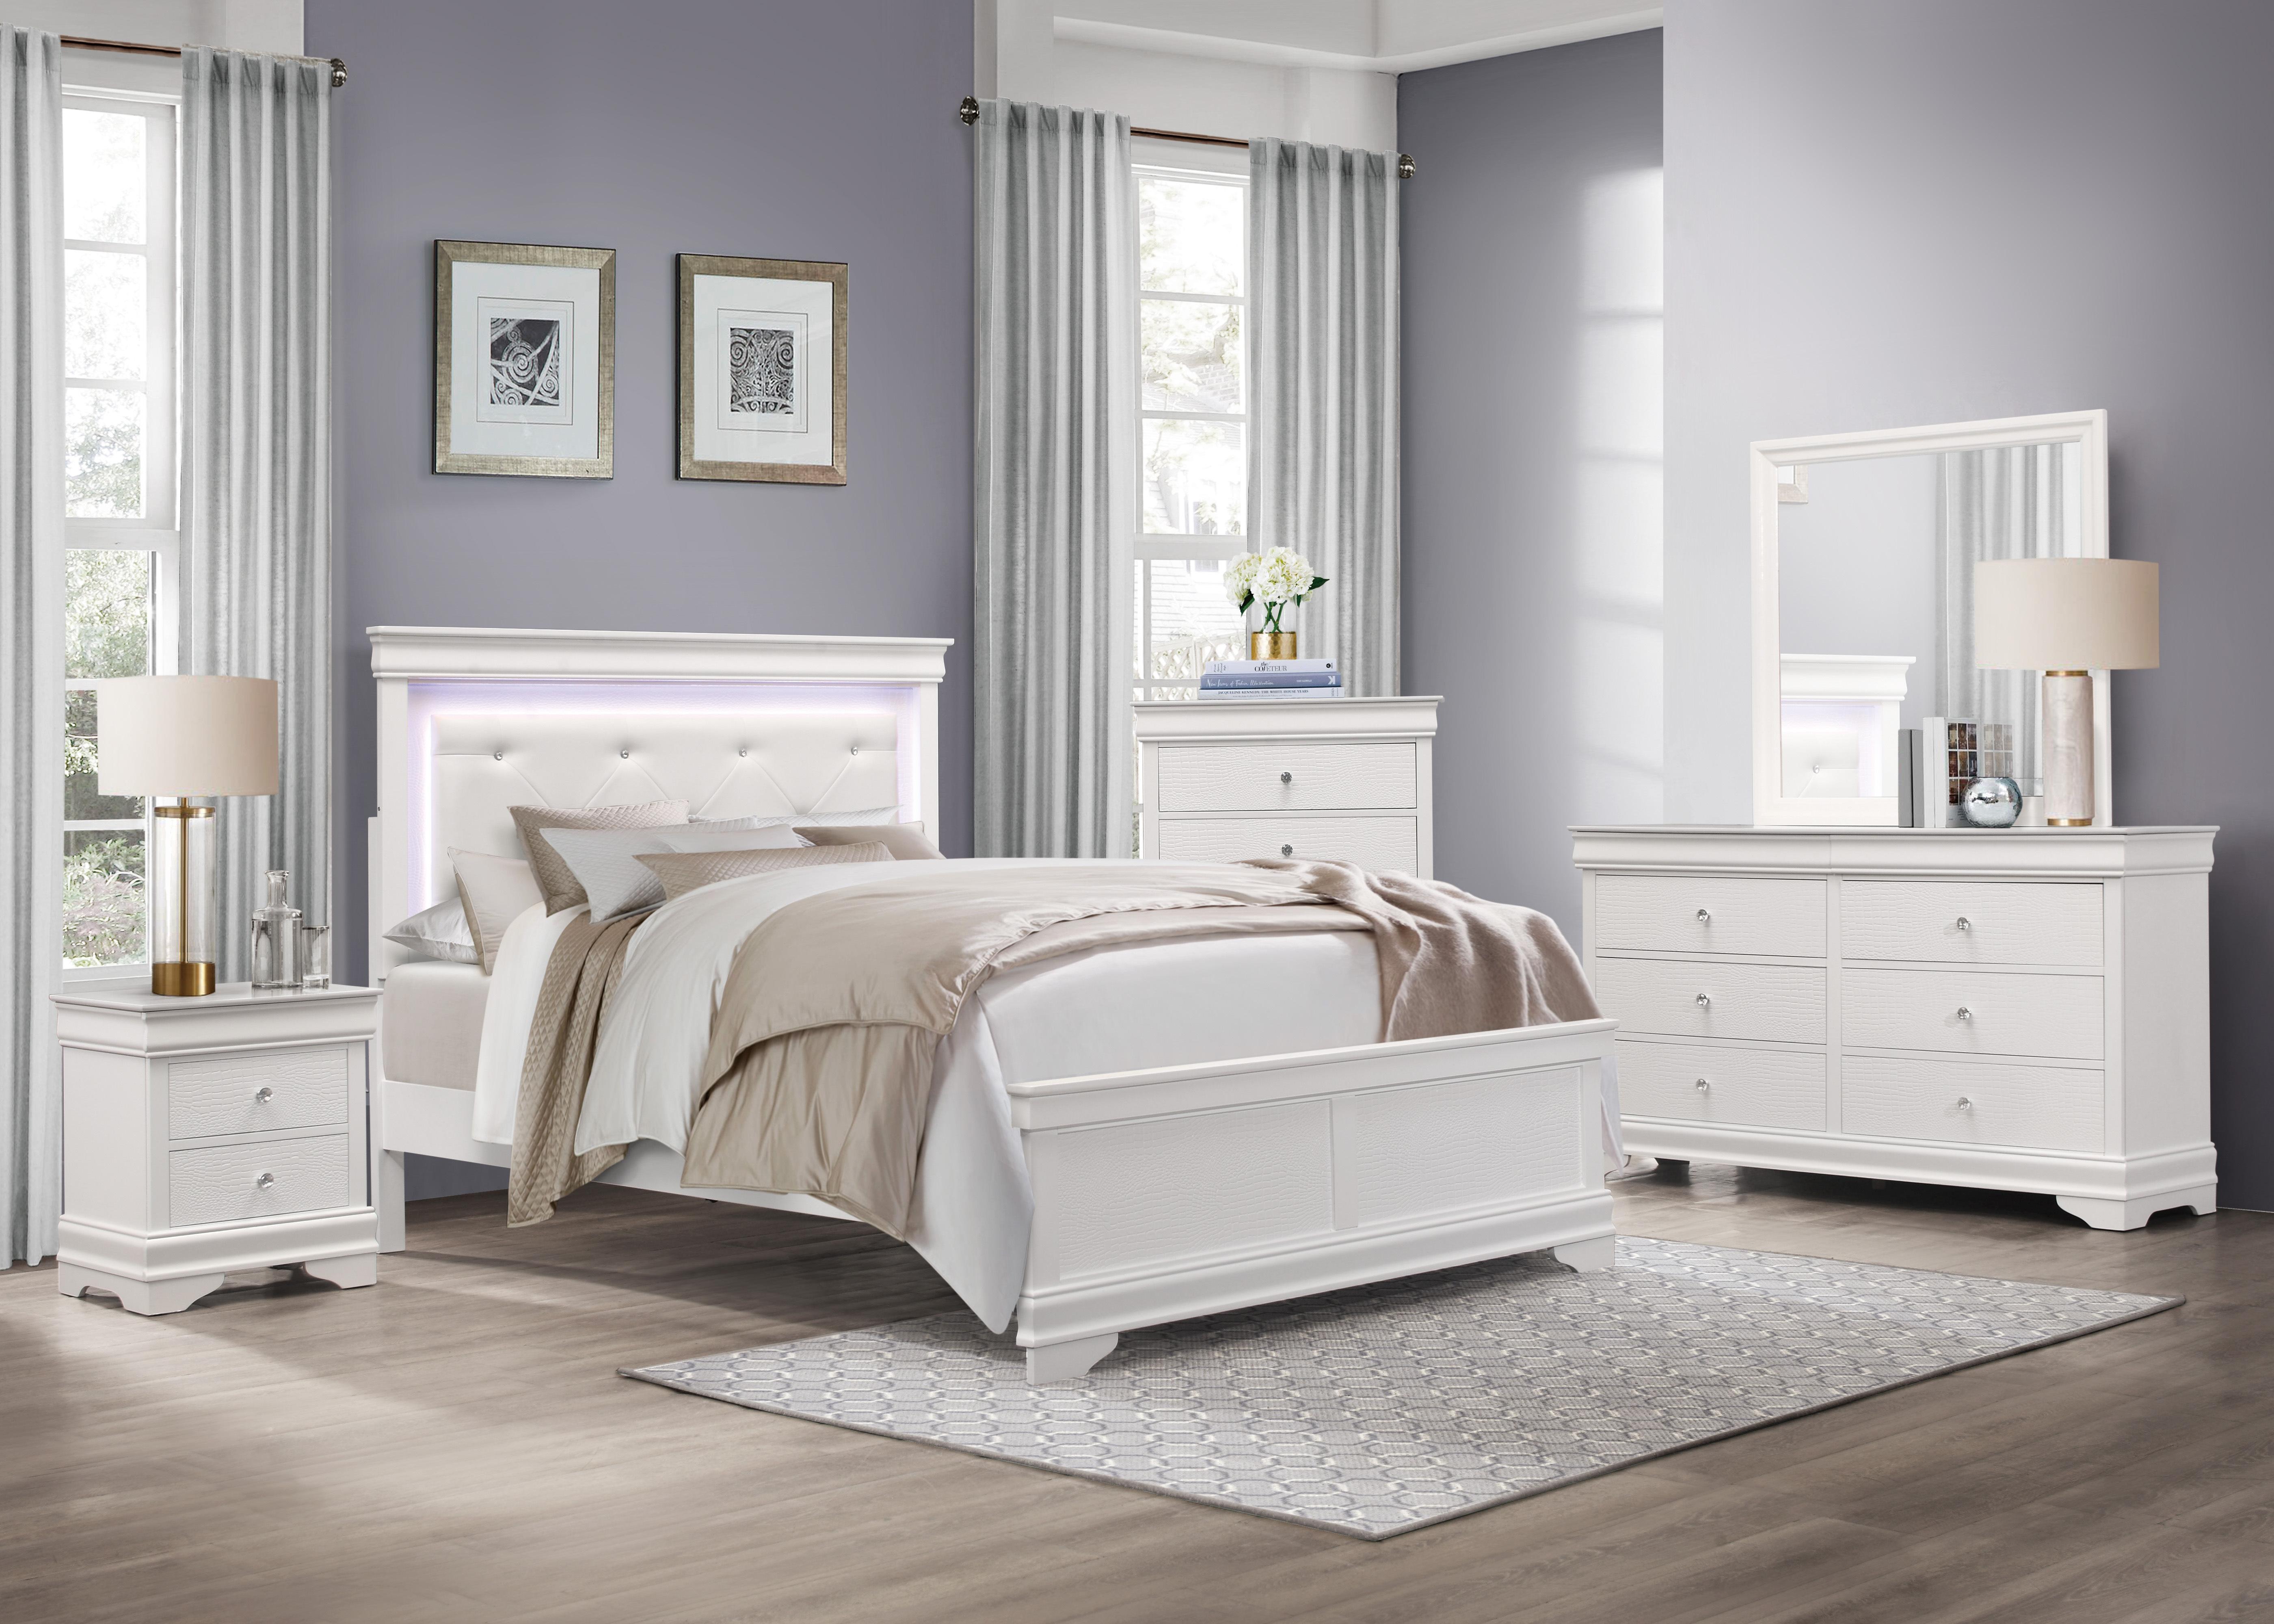 

    
Traditional White Wood Queen Bedroom Set 5pcs Homelegance 1556W-1* Lana
